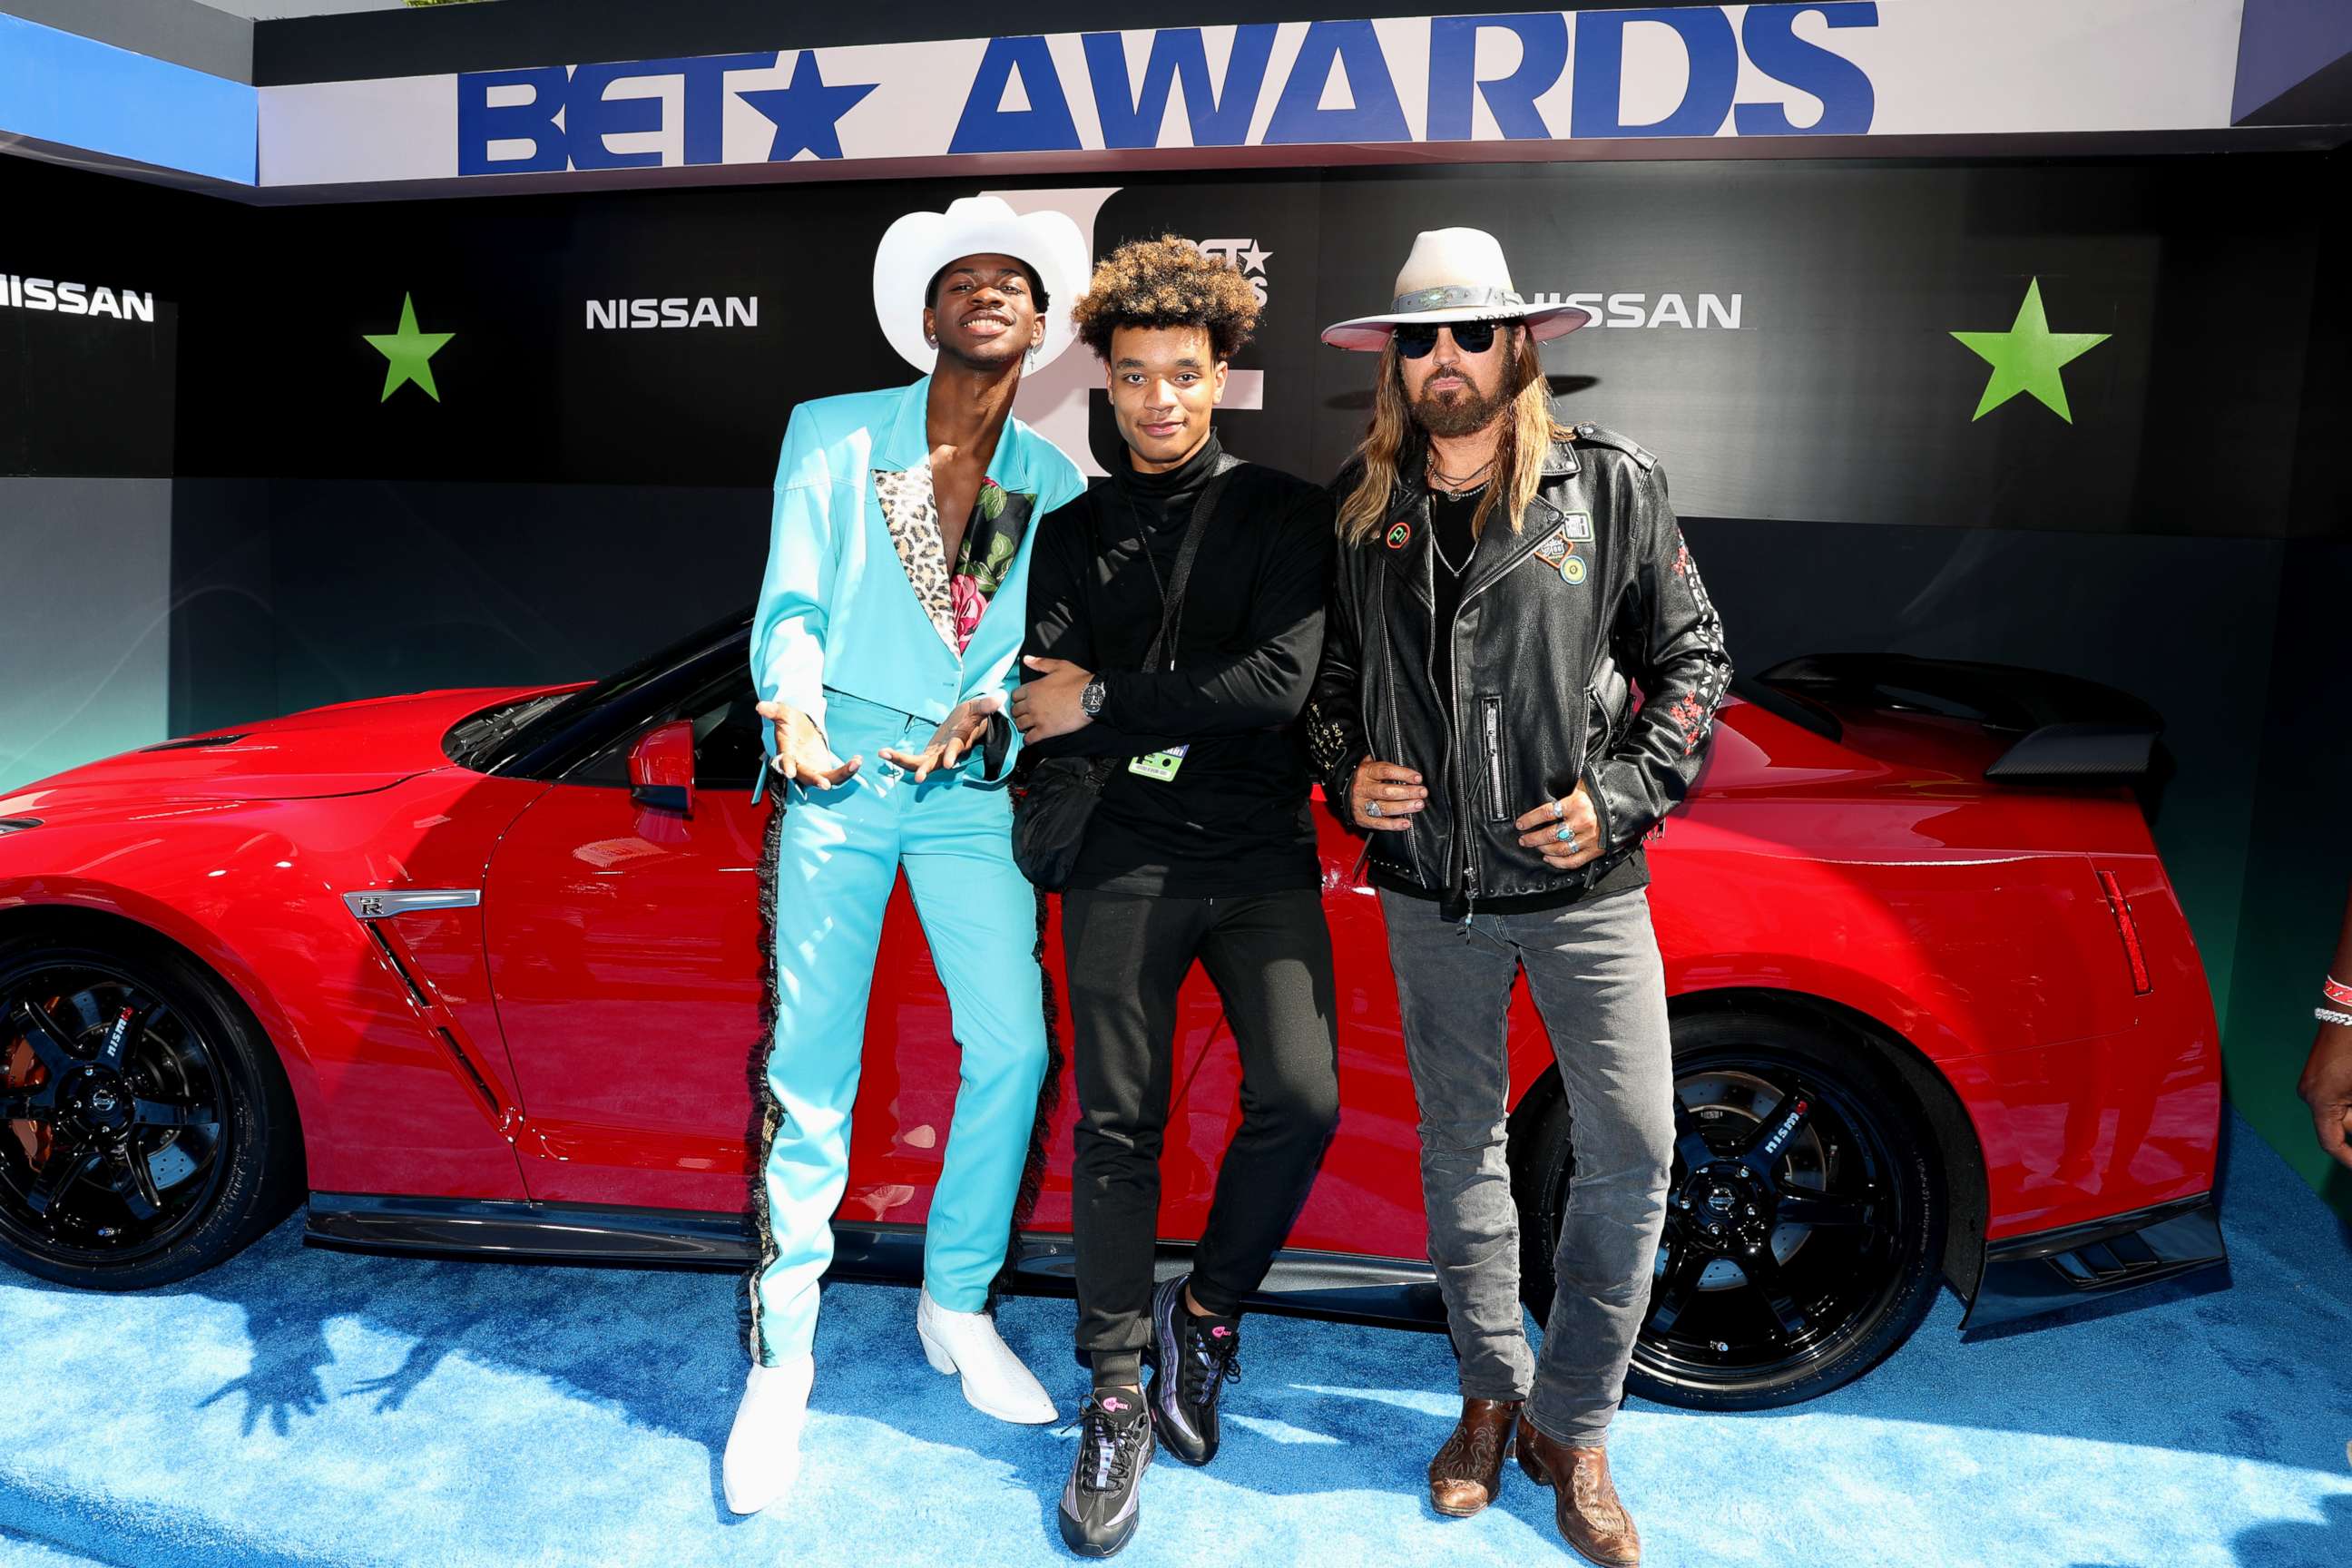 PHOTO: Lil Nas X, YoungKio, and Billy Ray Cyrus attend the 2019 BET Awards at Microsoft Theater on June 23, 2019 in Los Angeles.